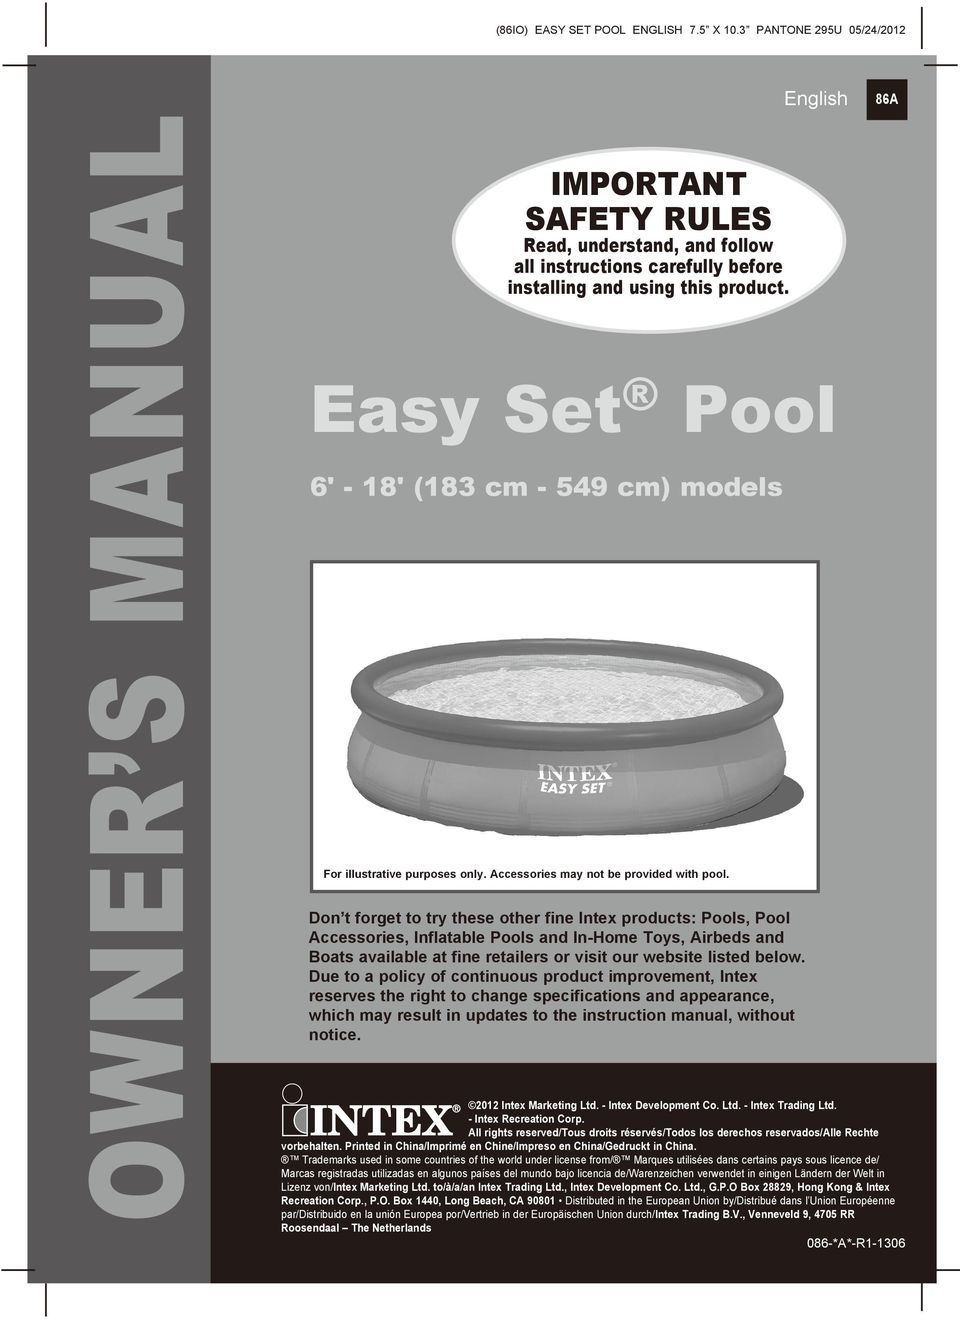 Don t forget to try these other fine Intex products: Pools, Pool Accessories, Inflatable Pools and In-Home Toys, Airbeds and Boats available at fine retailers or visit our website listed below.